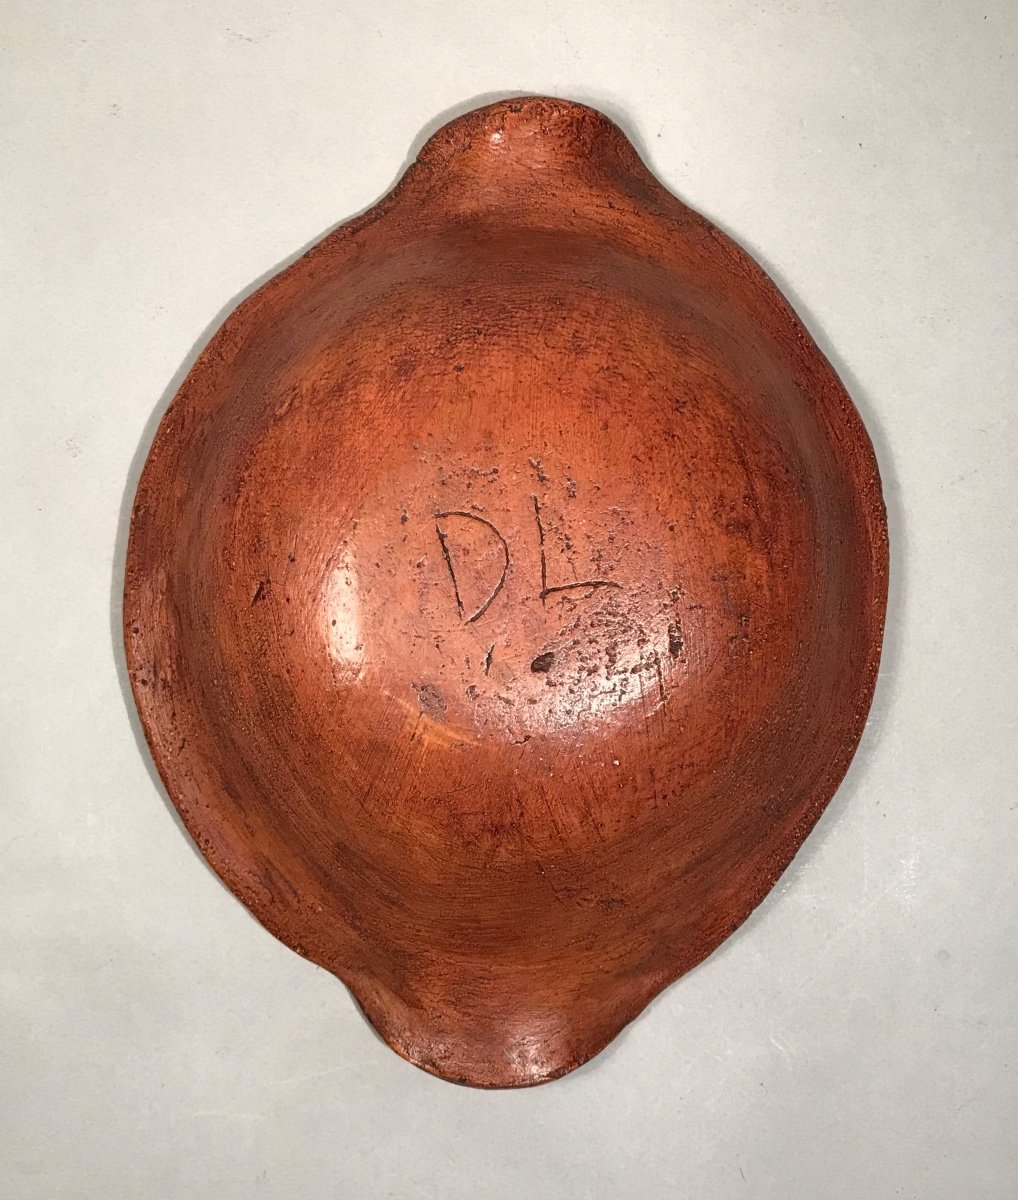 Popular Art Patinated Terracotta Dish With Plant Imprints Early 20th Century Haute-provence-photo-3